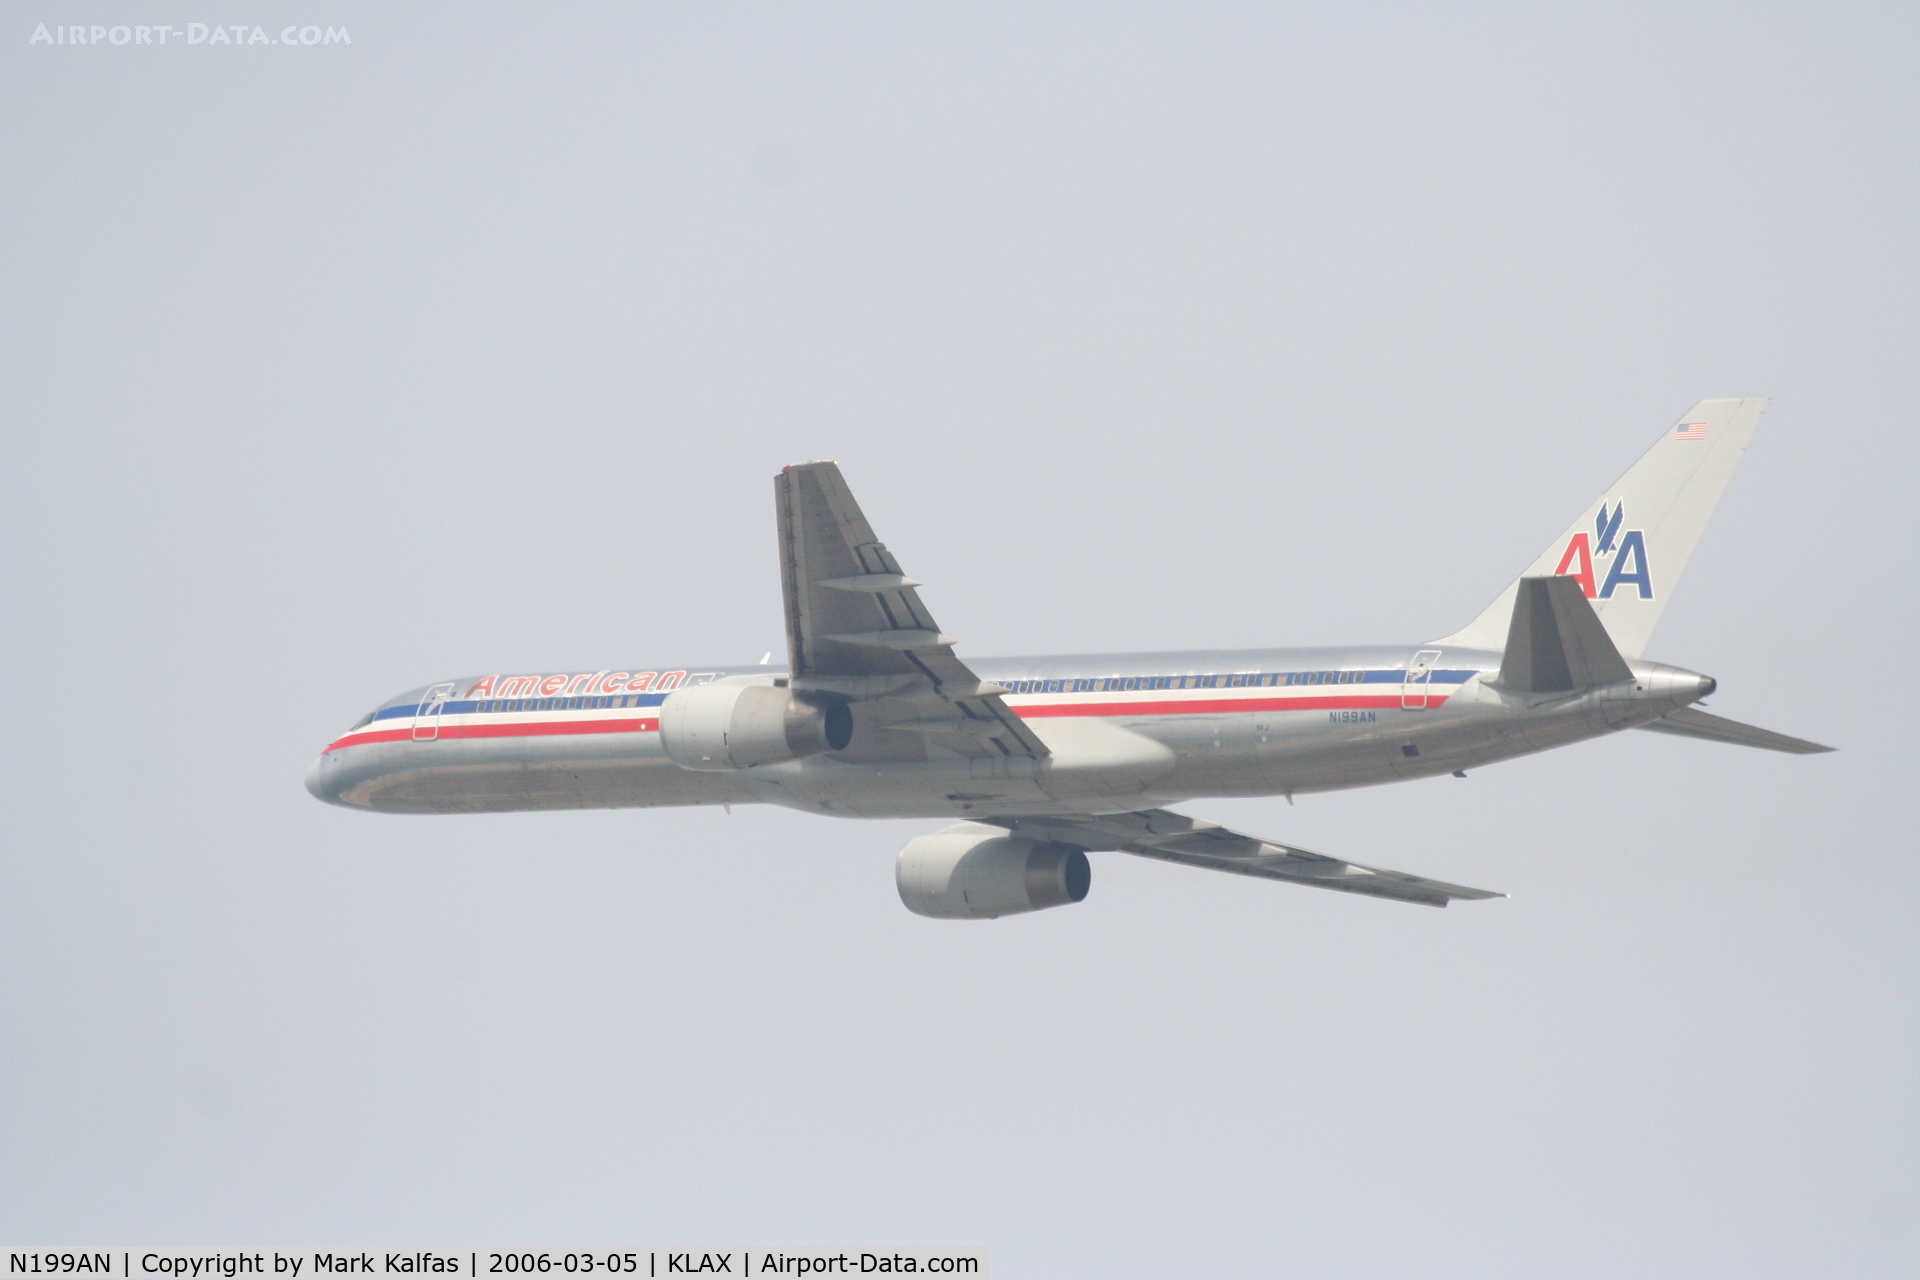 N199AN, 2001 Boeing 757-223 C/N 32393, American Airlines Boeing 757-223, N199AN, 25R departure KLAX with a left turn at the coast.